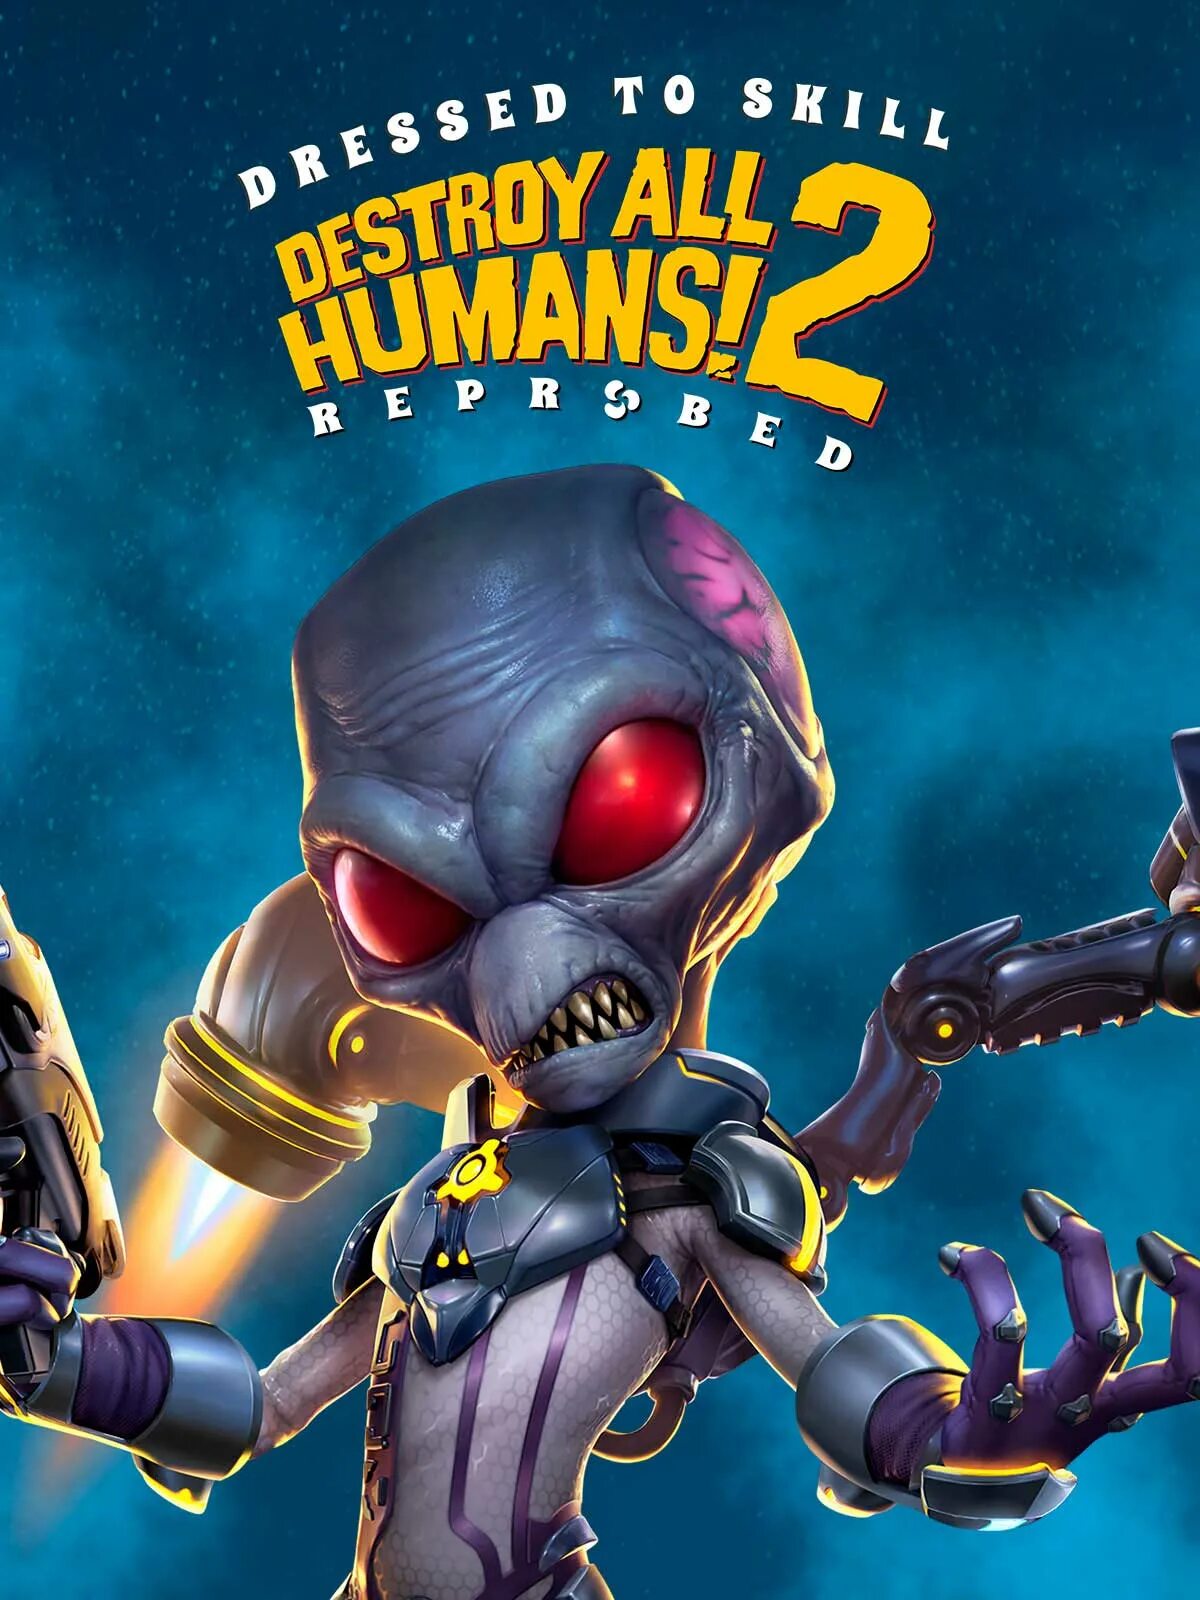 Destroy all Humans 2 reprobed. Destroy all Humans!. Destroy all Humans! 2 - Reprobed: Dressed to skill Edition. Destroy all humans reprobed